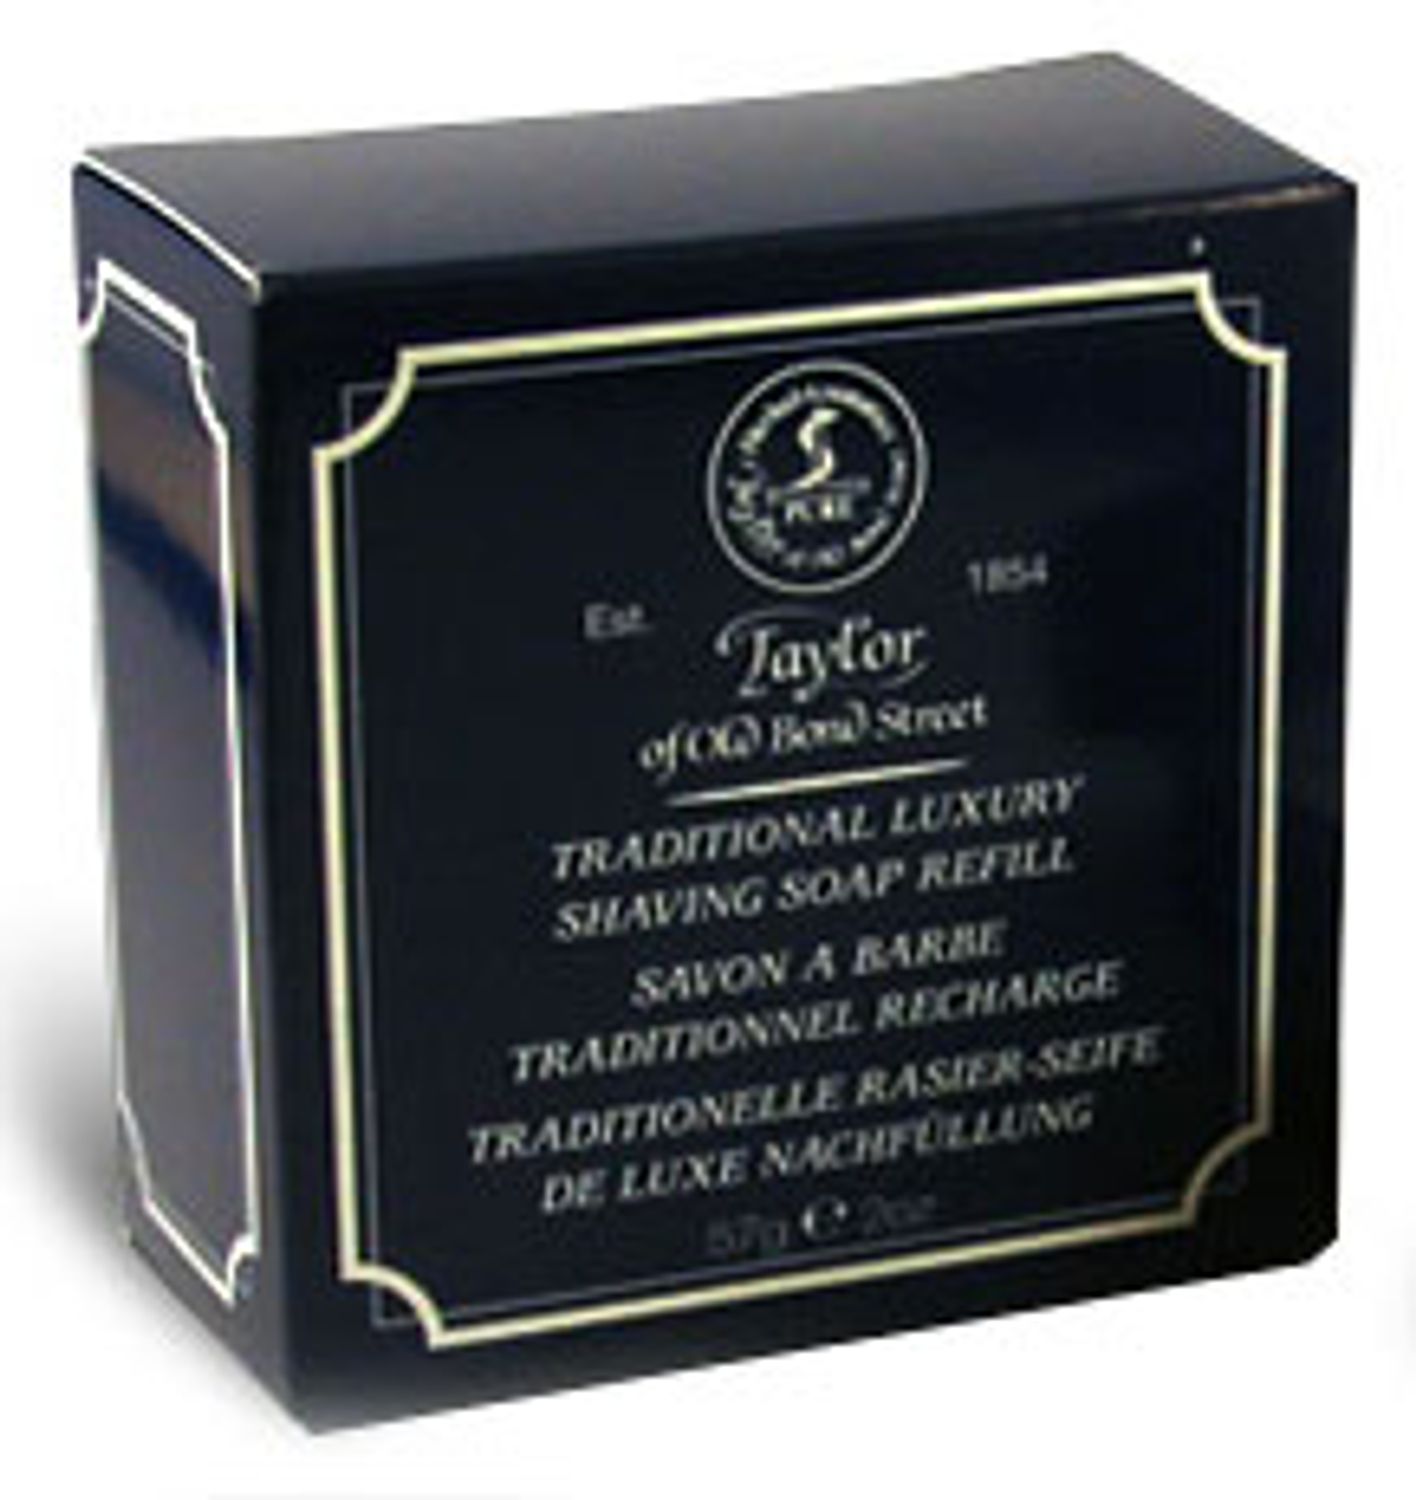 Taylor of Shave Soap Bond - KnifeCenter oz. Refill (57g) 2 Traditional Old Luxury Street 01052 